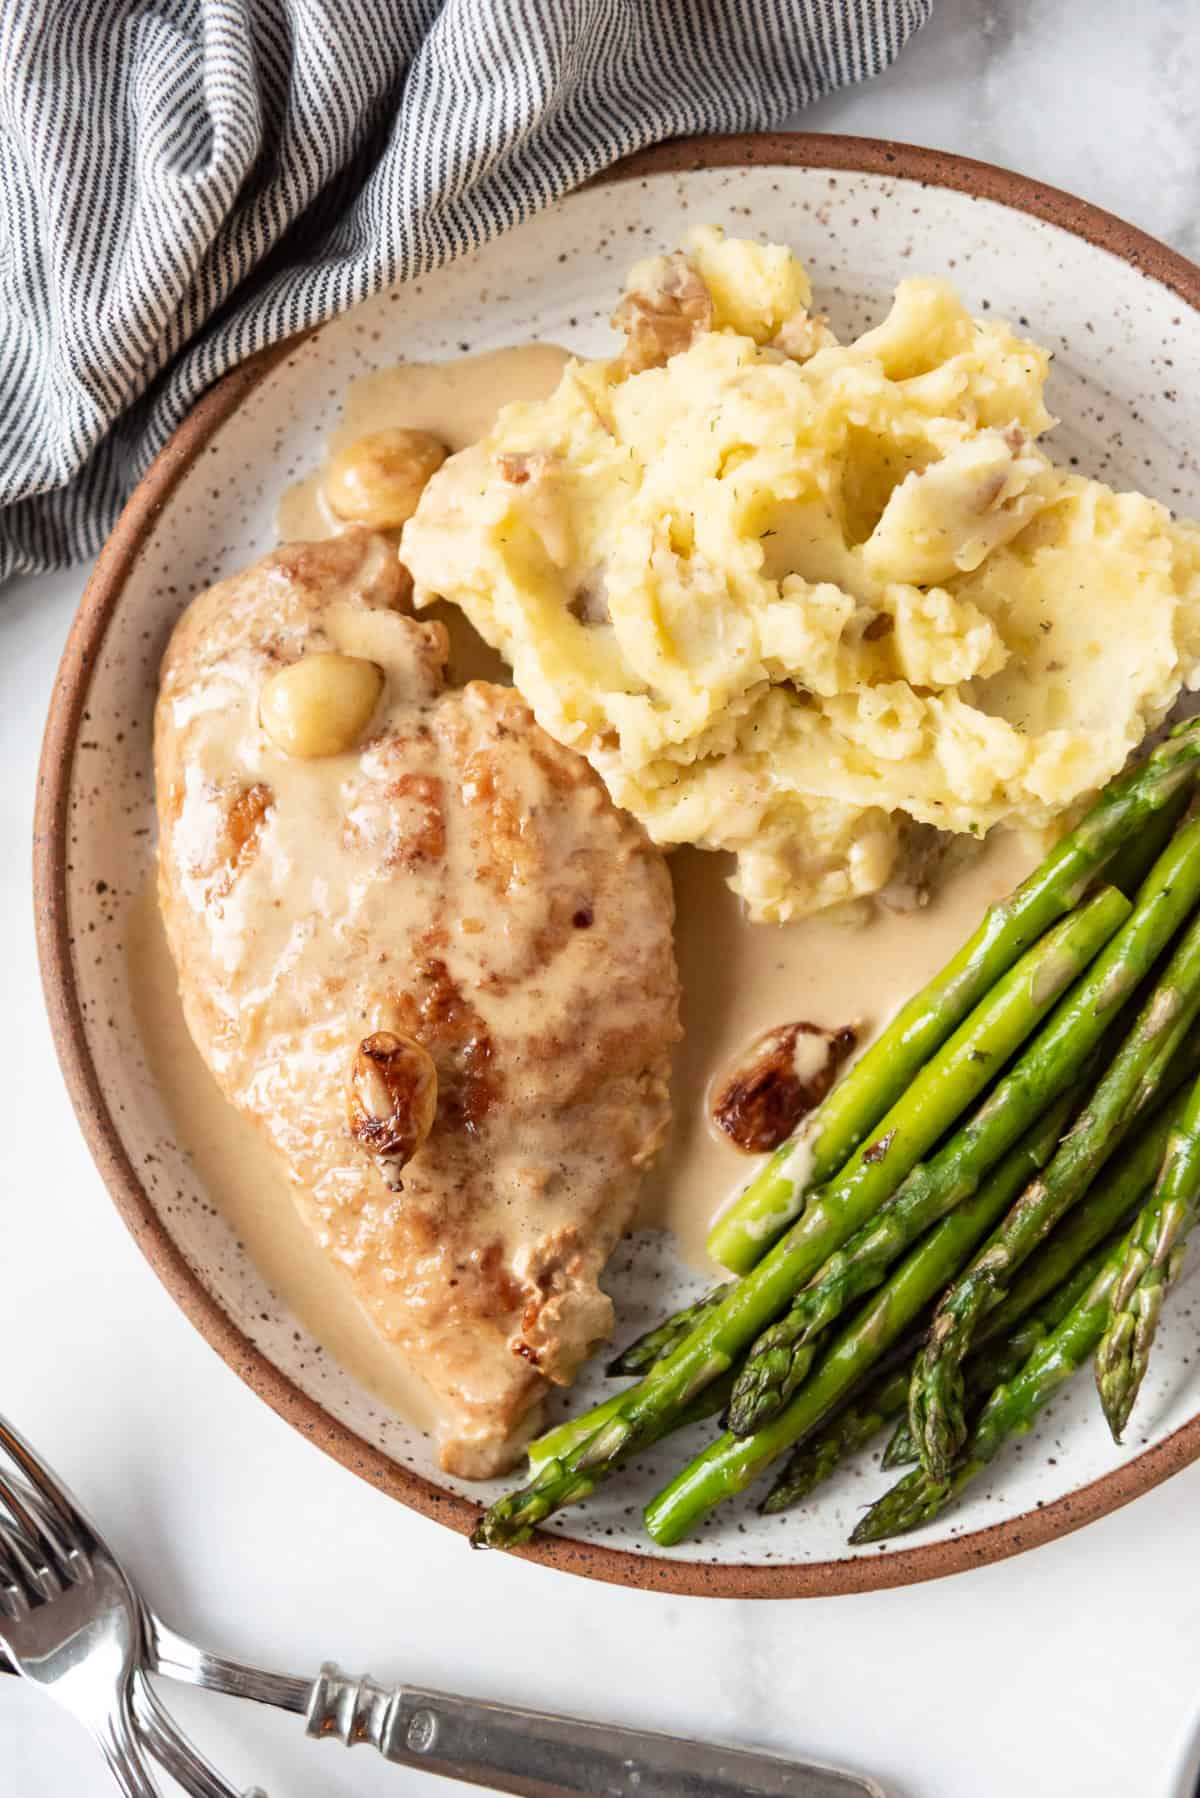 Pan-seared chicken breast cooked in a creamy garlic slice with whole garlic cloves being served with mashed potatoes and asparagus.